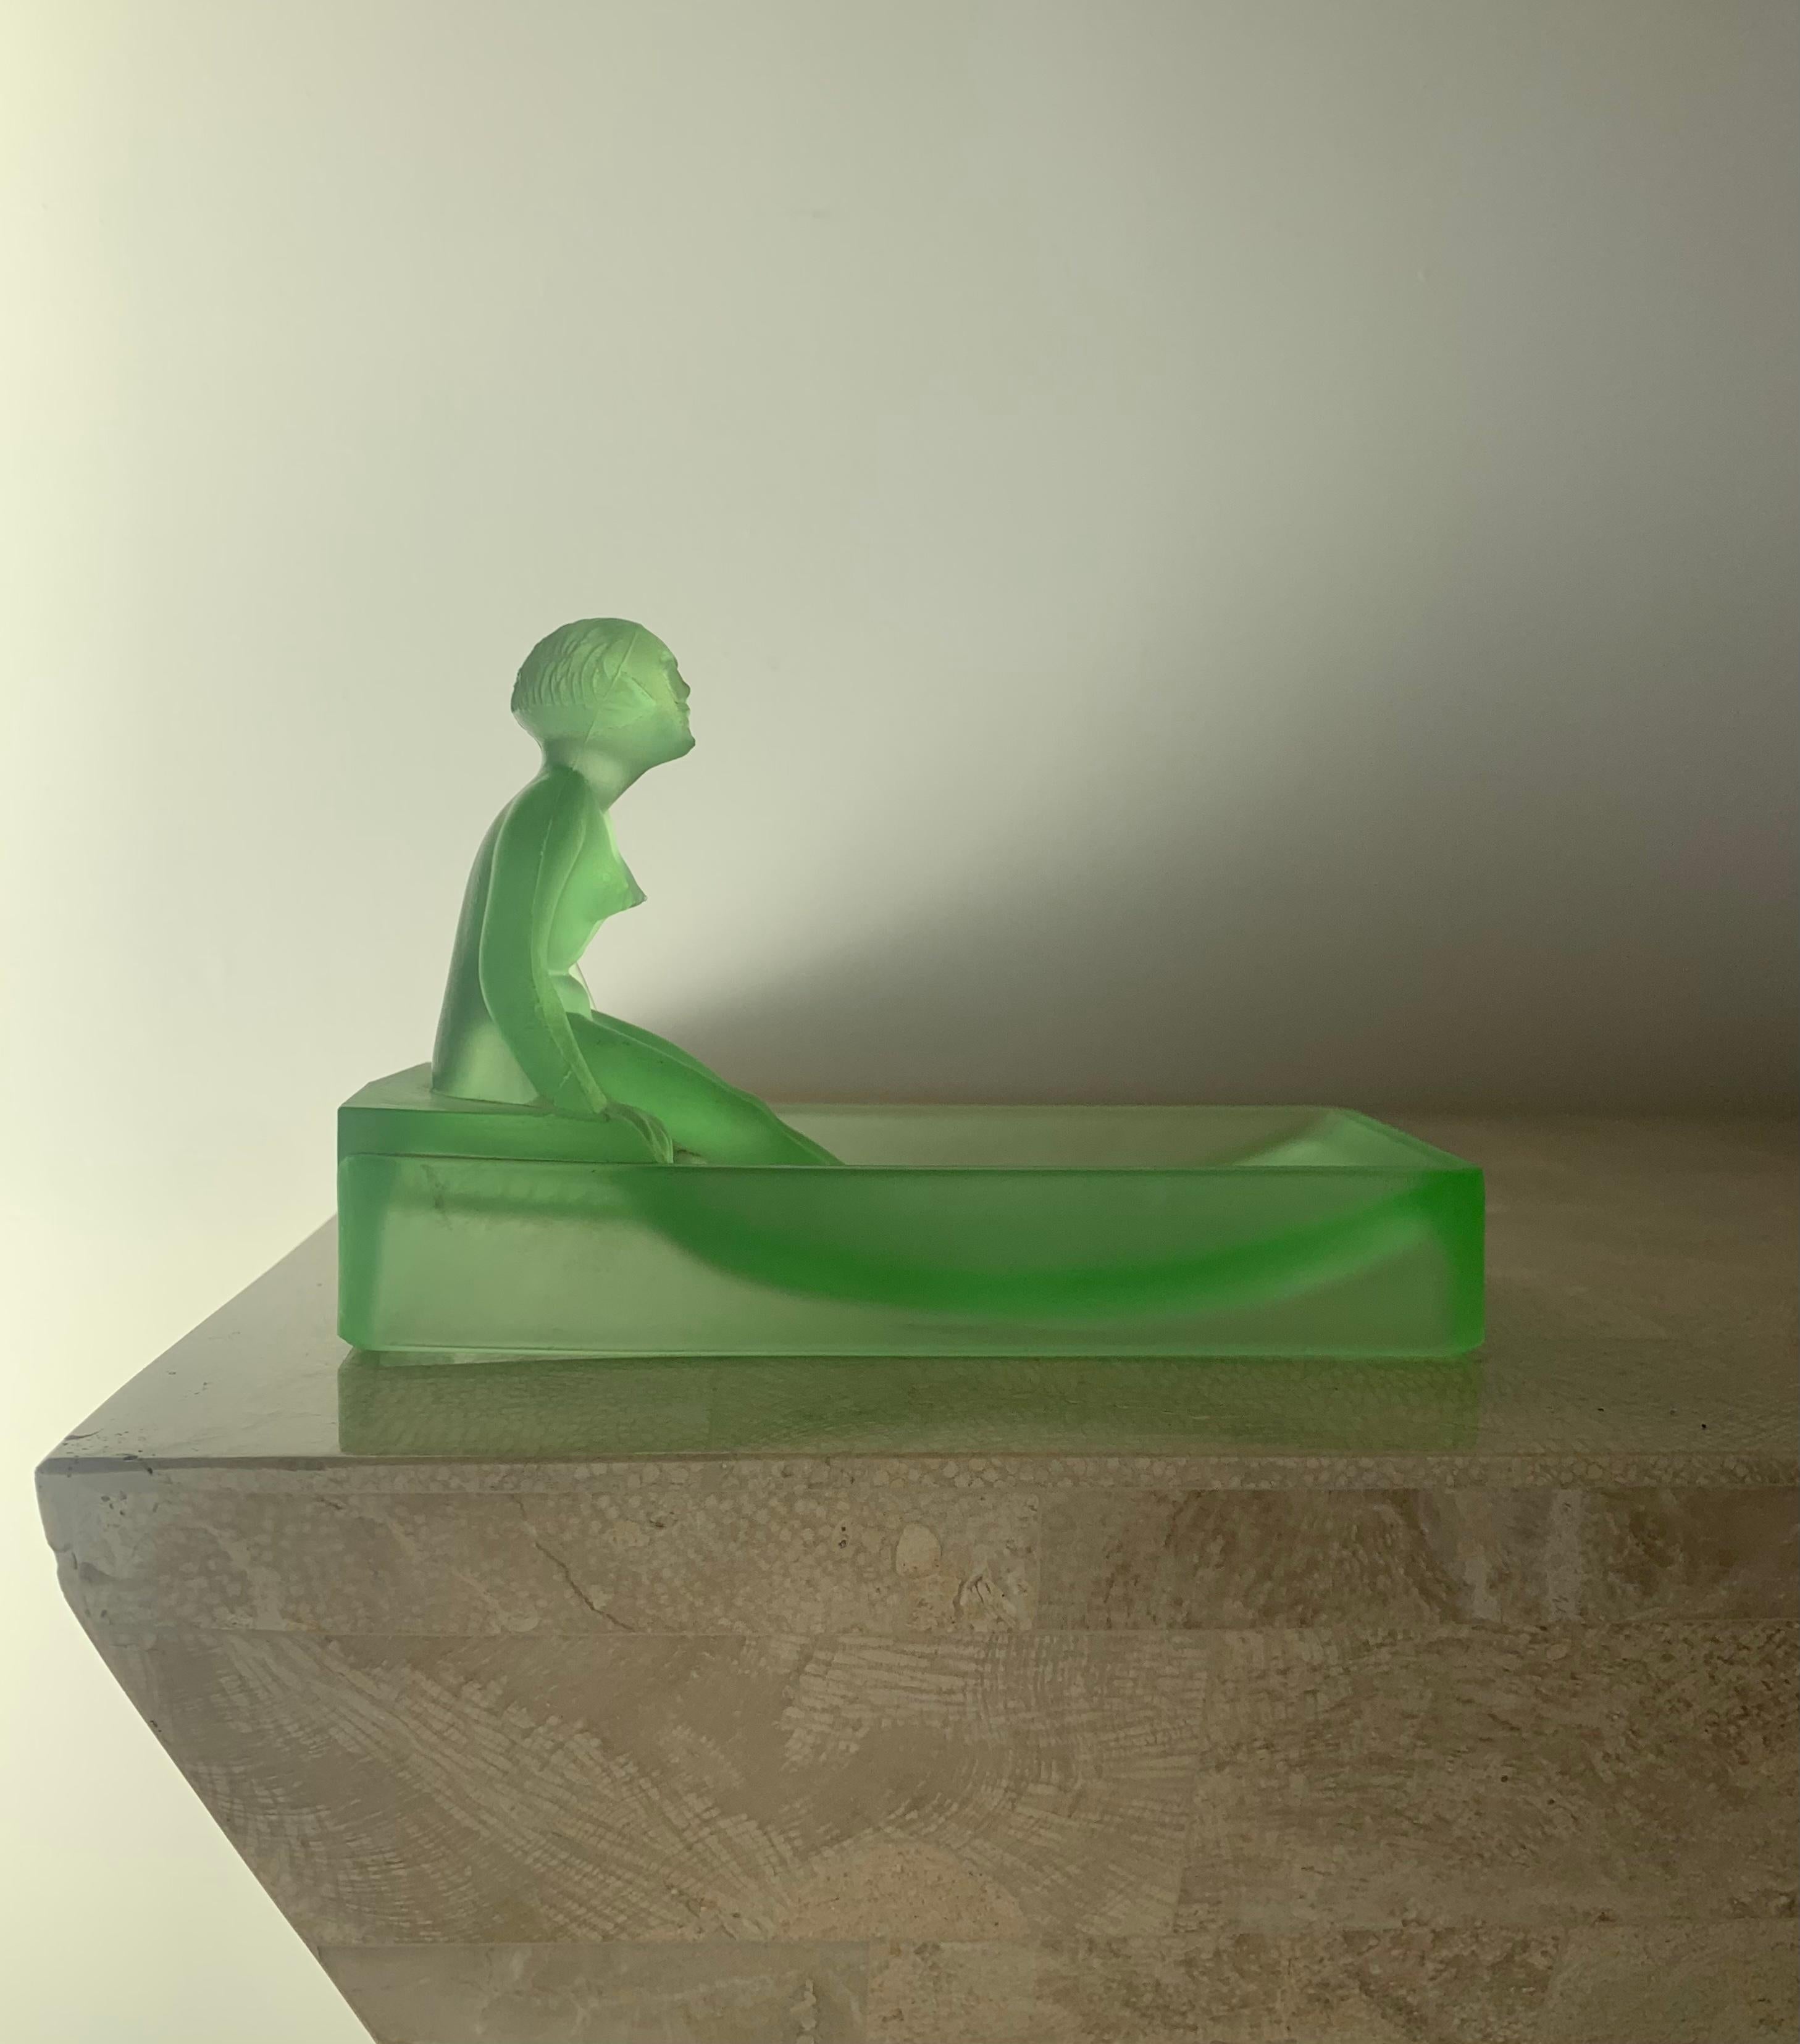 An extraordinarily rare relic of the 1920s Art Deco period, designed by Heinrich Hoffman and refashioned by Sarsaparilla Deco Designs (aka SDD) in 1981: a depression glass vide-poche in frosted key-lime green featuring a nude bather perched at the